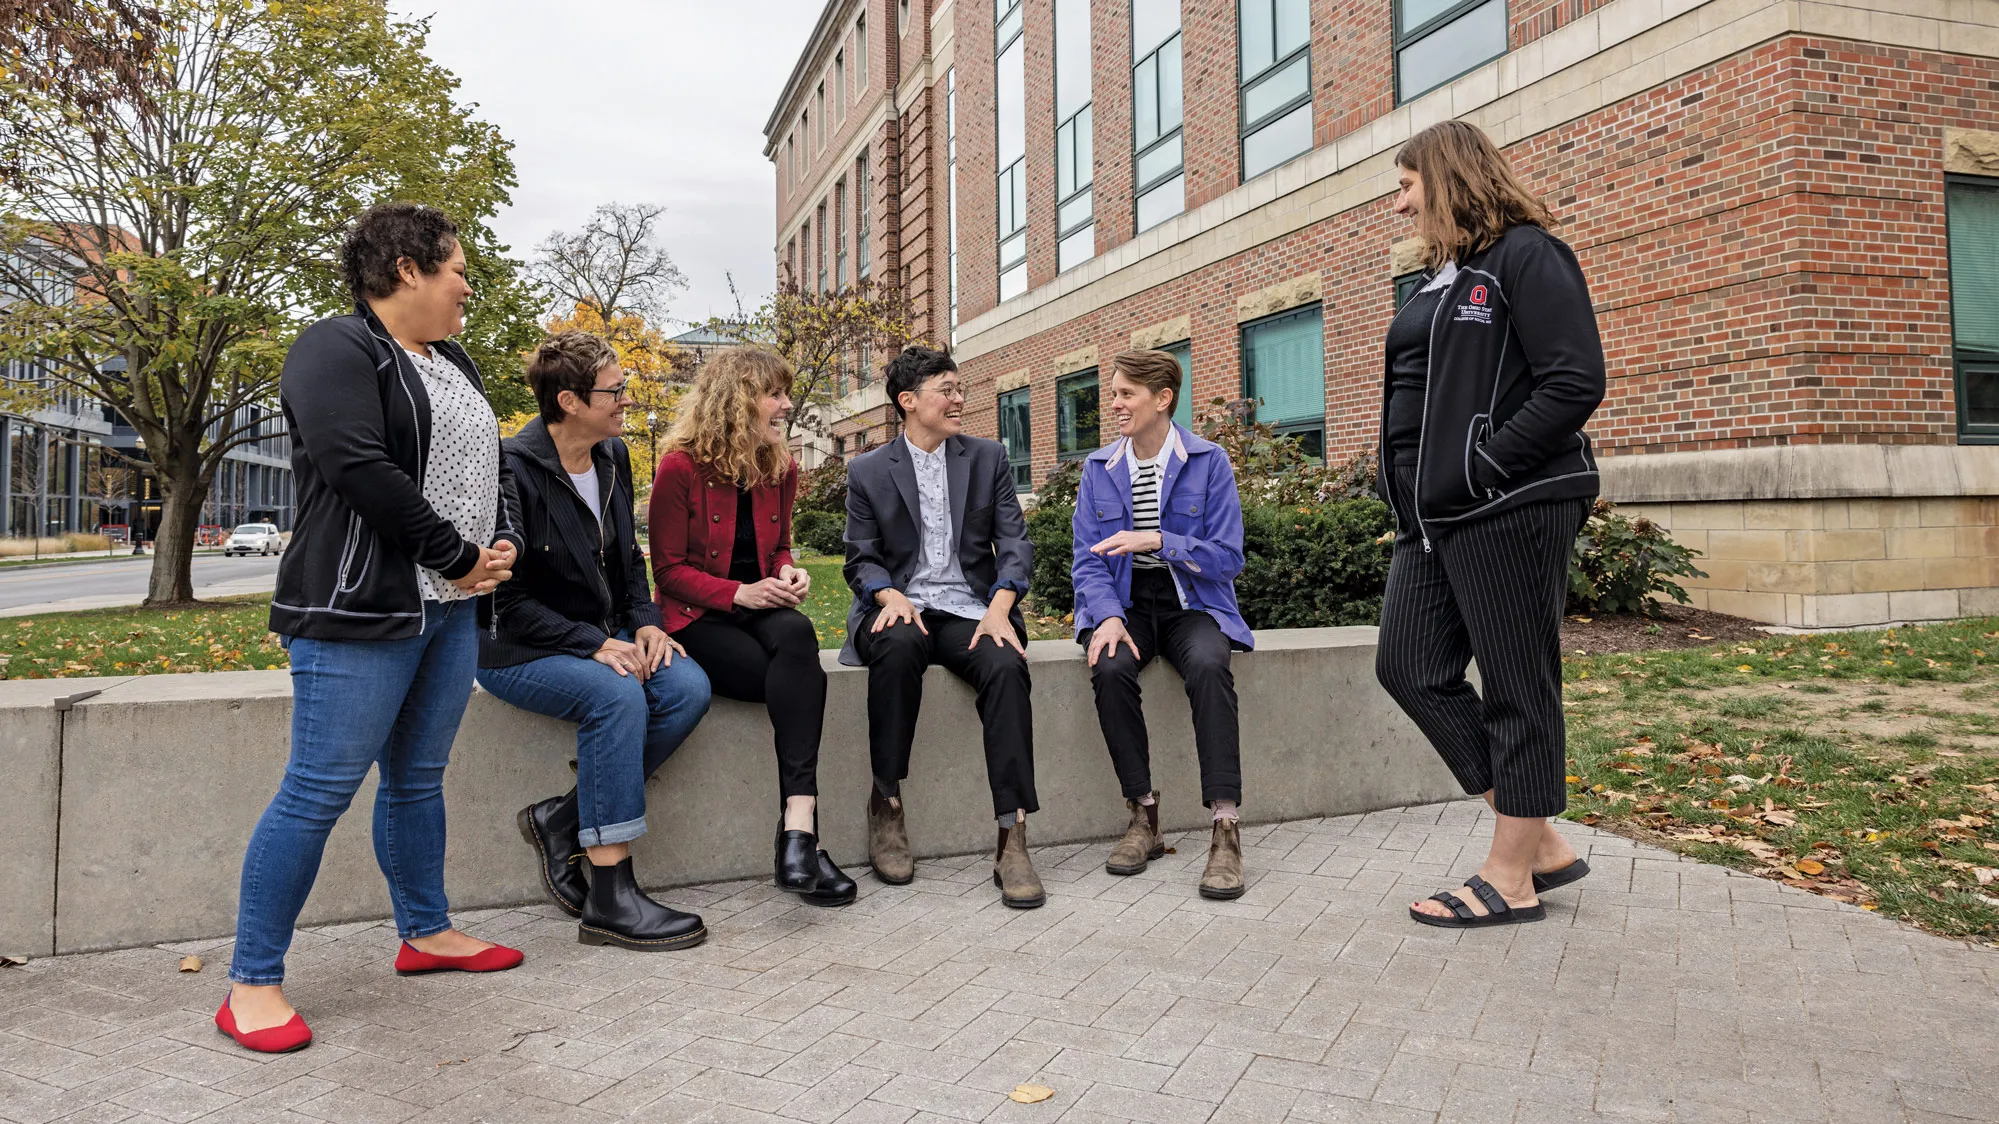 Outside of the brick Stillman Hall, a group gathers on a small paved plaza. Some sit on a low wall and some stand as they happily chat on what seems to be a chilly fall day, judging by their jackets and leaf colors on trees in the background. The people are a mix of ages and genders.